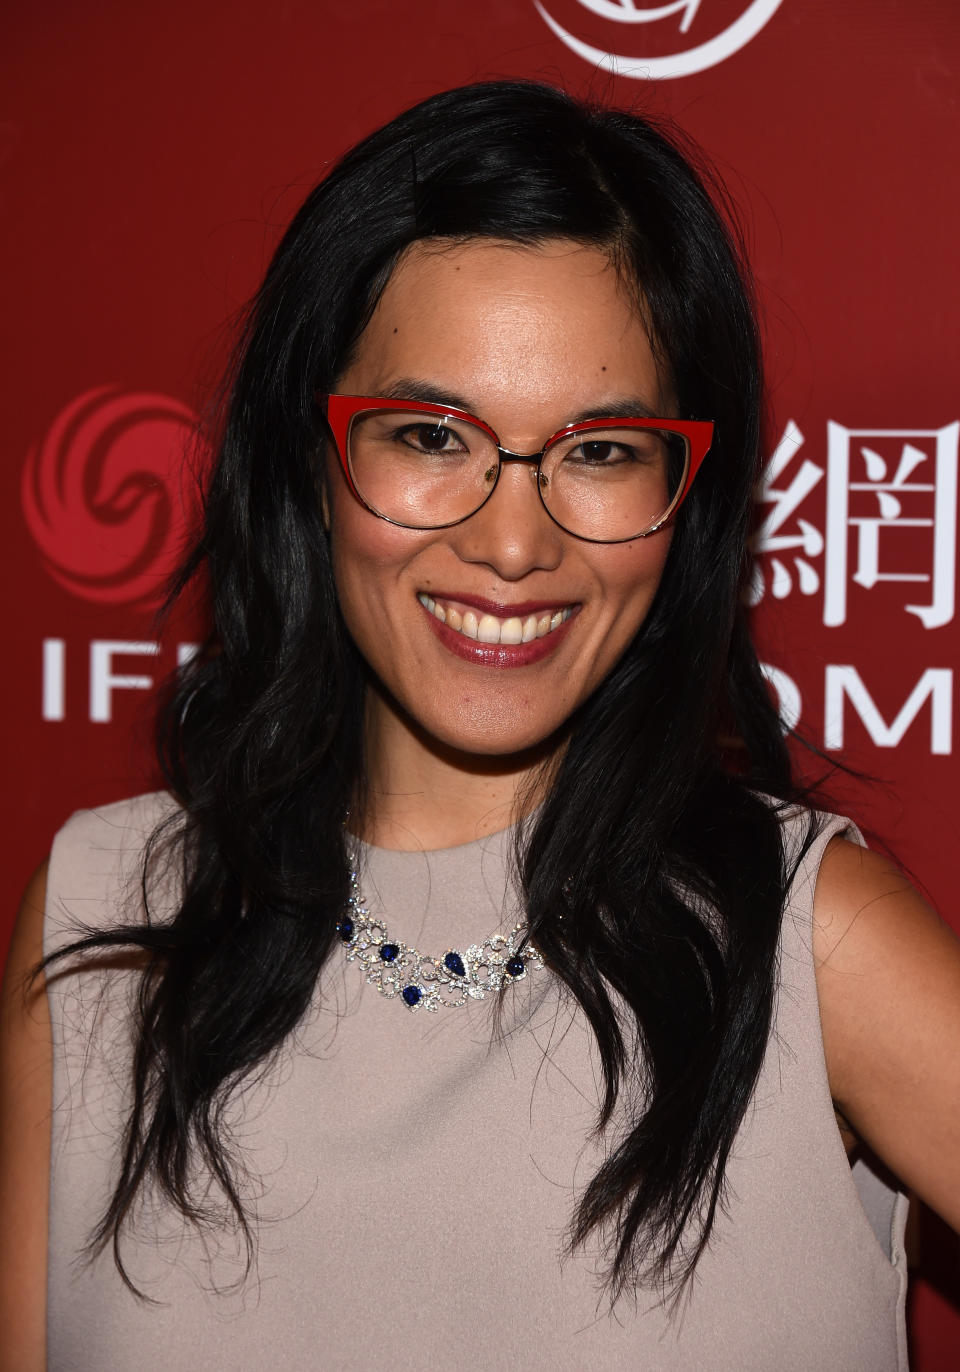 In a 2016 interview <a href="https://www.theguardian.com/culture/2016/jun/09/comedian-ali-wong-netflix-baby-cobra-fresh-off-the-boat" target="_blank">with The Guardian</a>, Ali Wong&nbsp;spoke about miscarrying twins and why she's turned that experience into part of her comedy routine.<br /><br />"It really helped me when I had a miscarriage to talk to other women and hear that they&rsquo;d been through it, too," she said. "It&rsquo;s one thing to hear the statistics but it&rsquo;s another to put faces to the numbers so you stop feeling like it&rsquo;s your fault." <br /><br />She added, "I think that&rsquo;s one of the reasons women don&rsquo;t tell people when they&rsquo;ve had a miscarriage -- they think it&rsquo;s their fault. I remember I worried what my in-laws would think, which is so crazy. I thought they&rsquo;d think their son had married a terrible person."